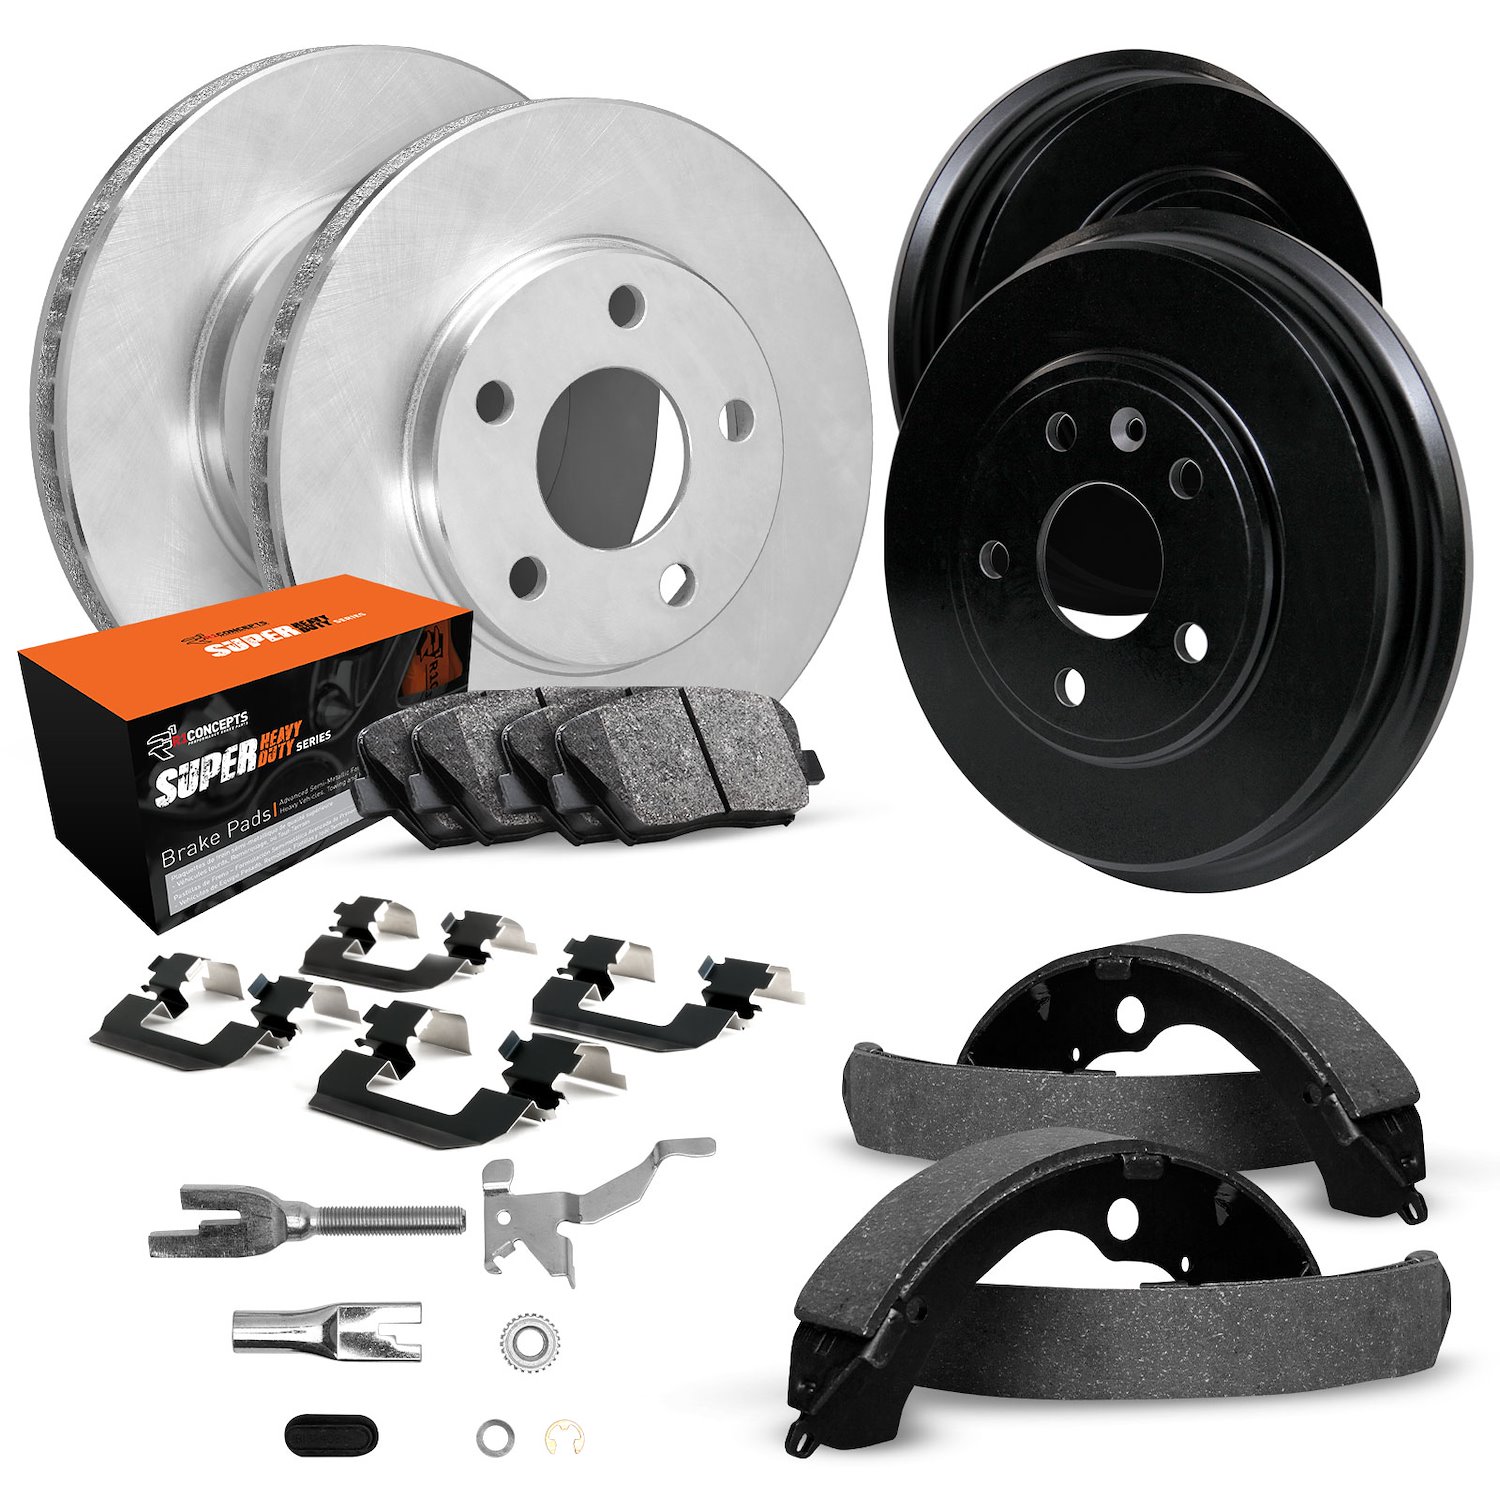 E-Line Blank Brake Rotor & Drum Set w/Super-Duty Pads, Shoes, Hardware, & Adjusters, 1986-1990 Ford/Lincoln/Mercury/Mazda